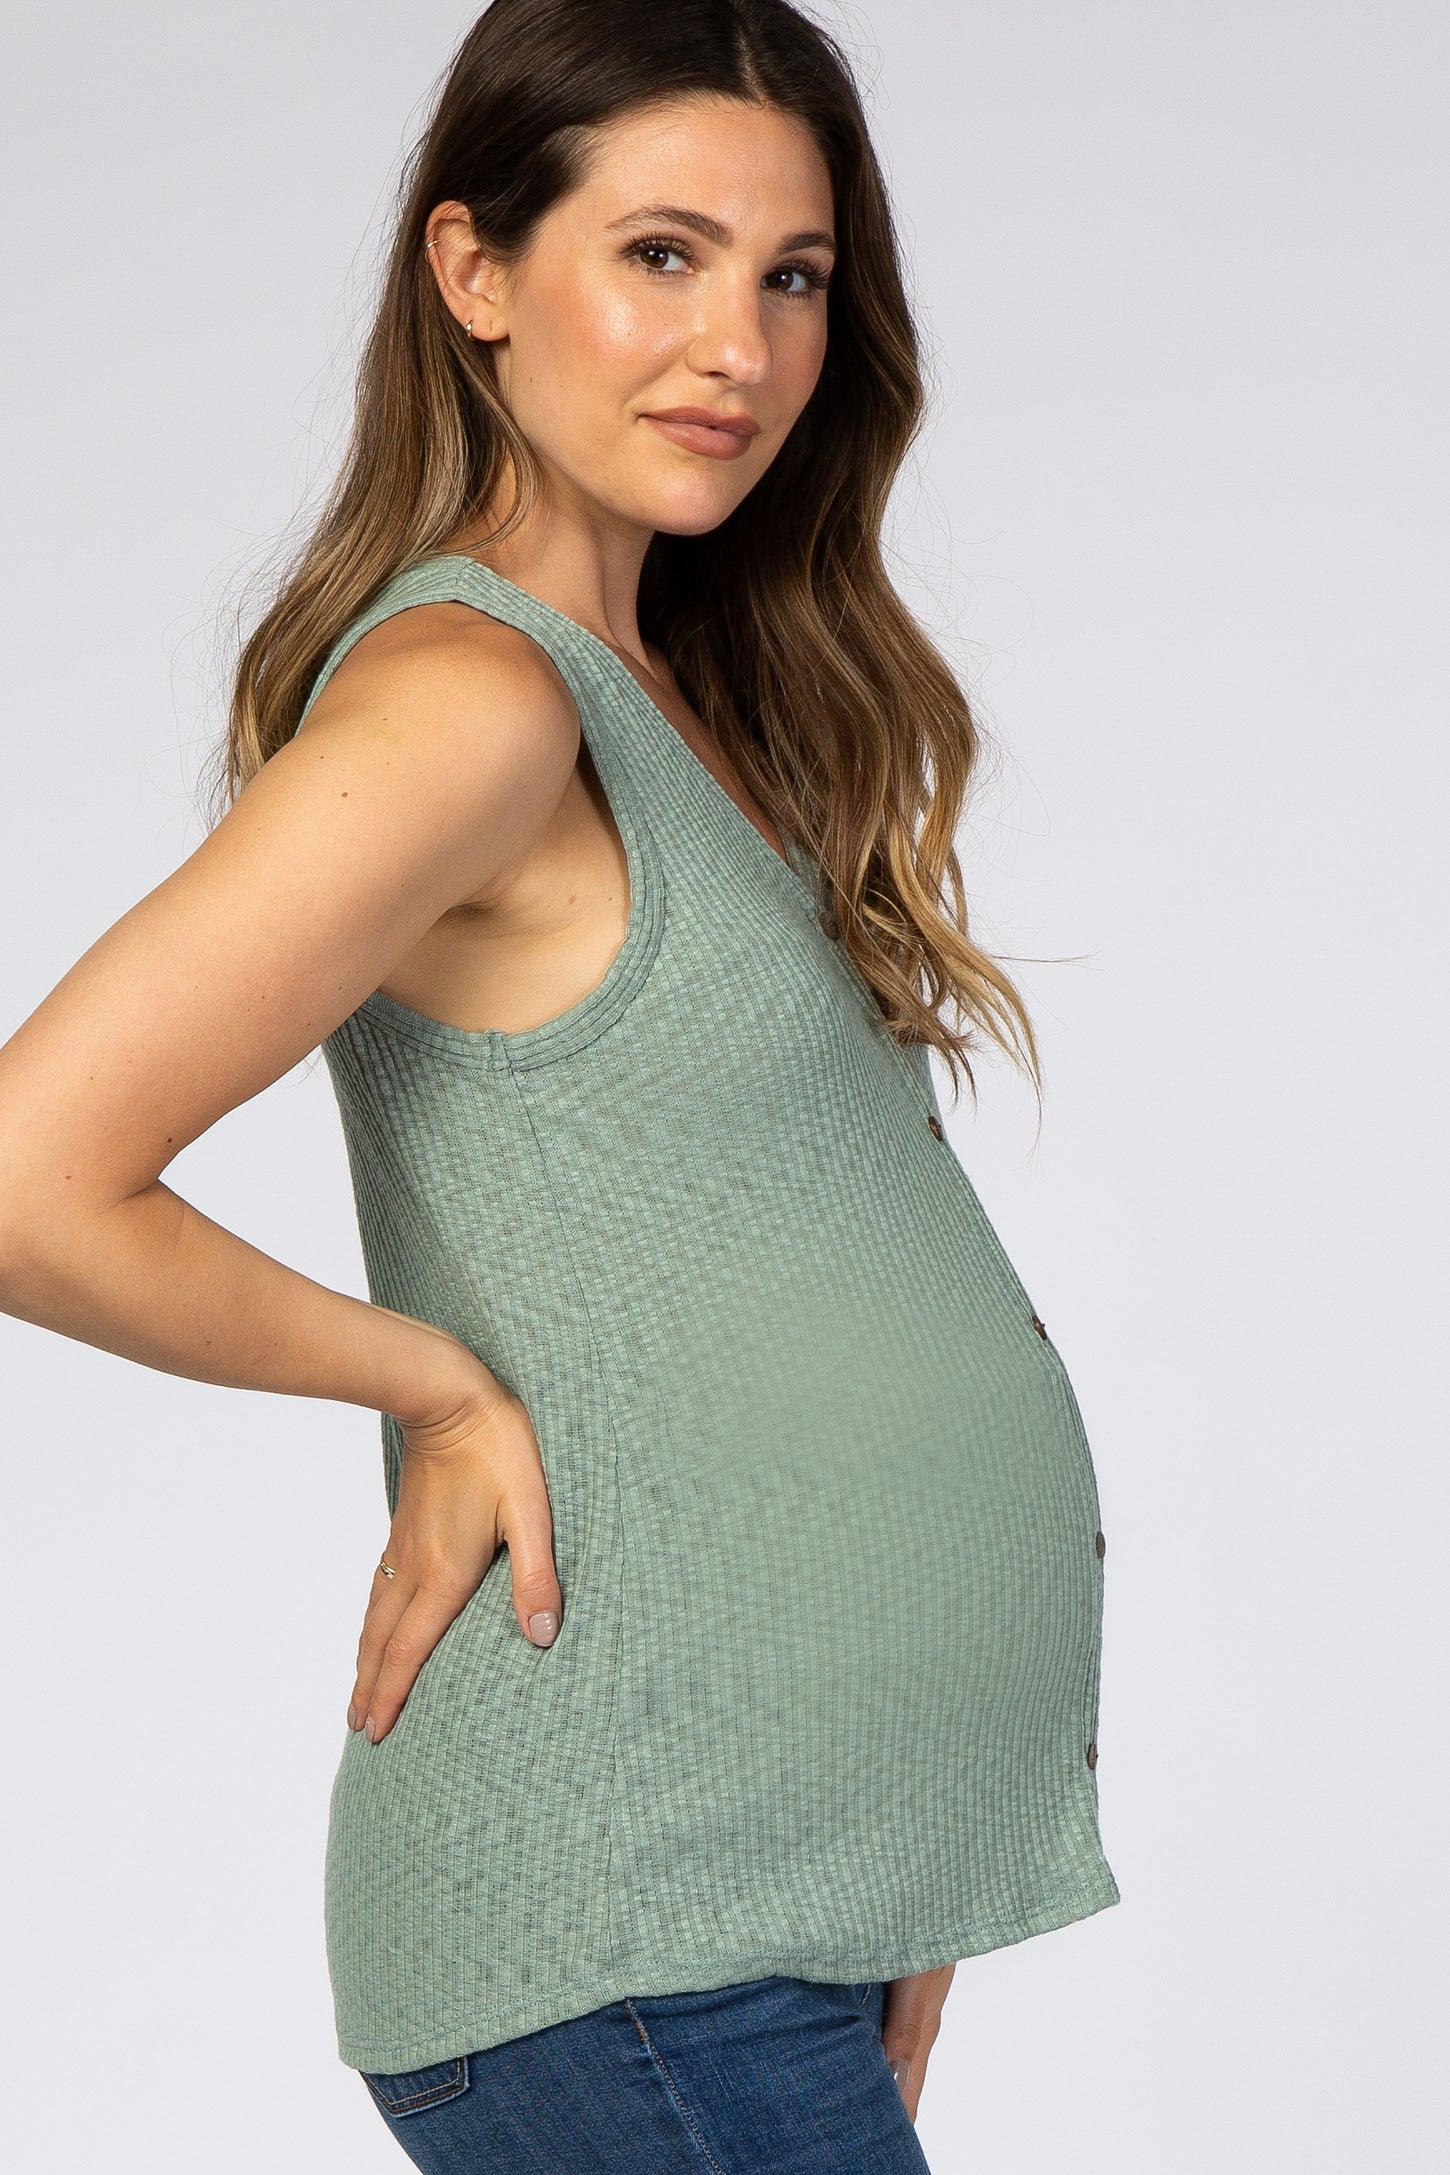 Light Olive Ribbed Button Front Sleeveless Maternity Top